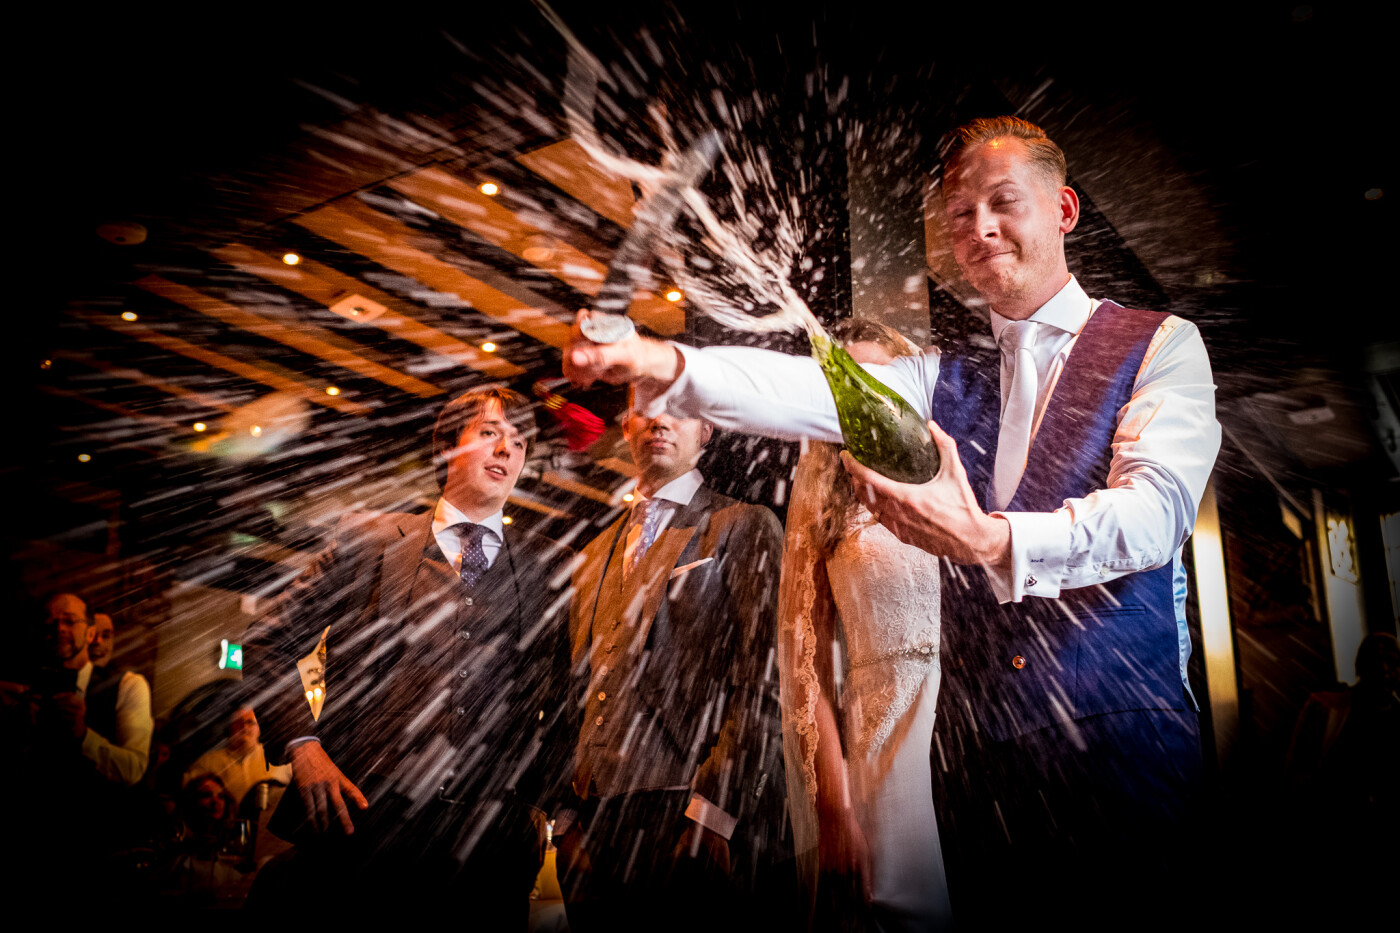 Did I get wet during this sabrage? You bet! But that's the point of going to the extremes for every photograph, right? Matthew practiced this a few times before the wedding, which possibly added to the success of this image. This wedding in The Hague was a very memorable occasion, with beautiful people from all over the world.